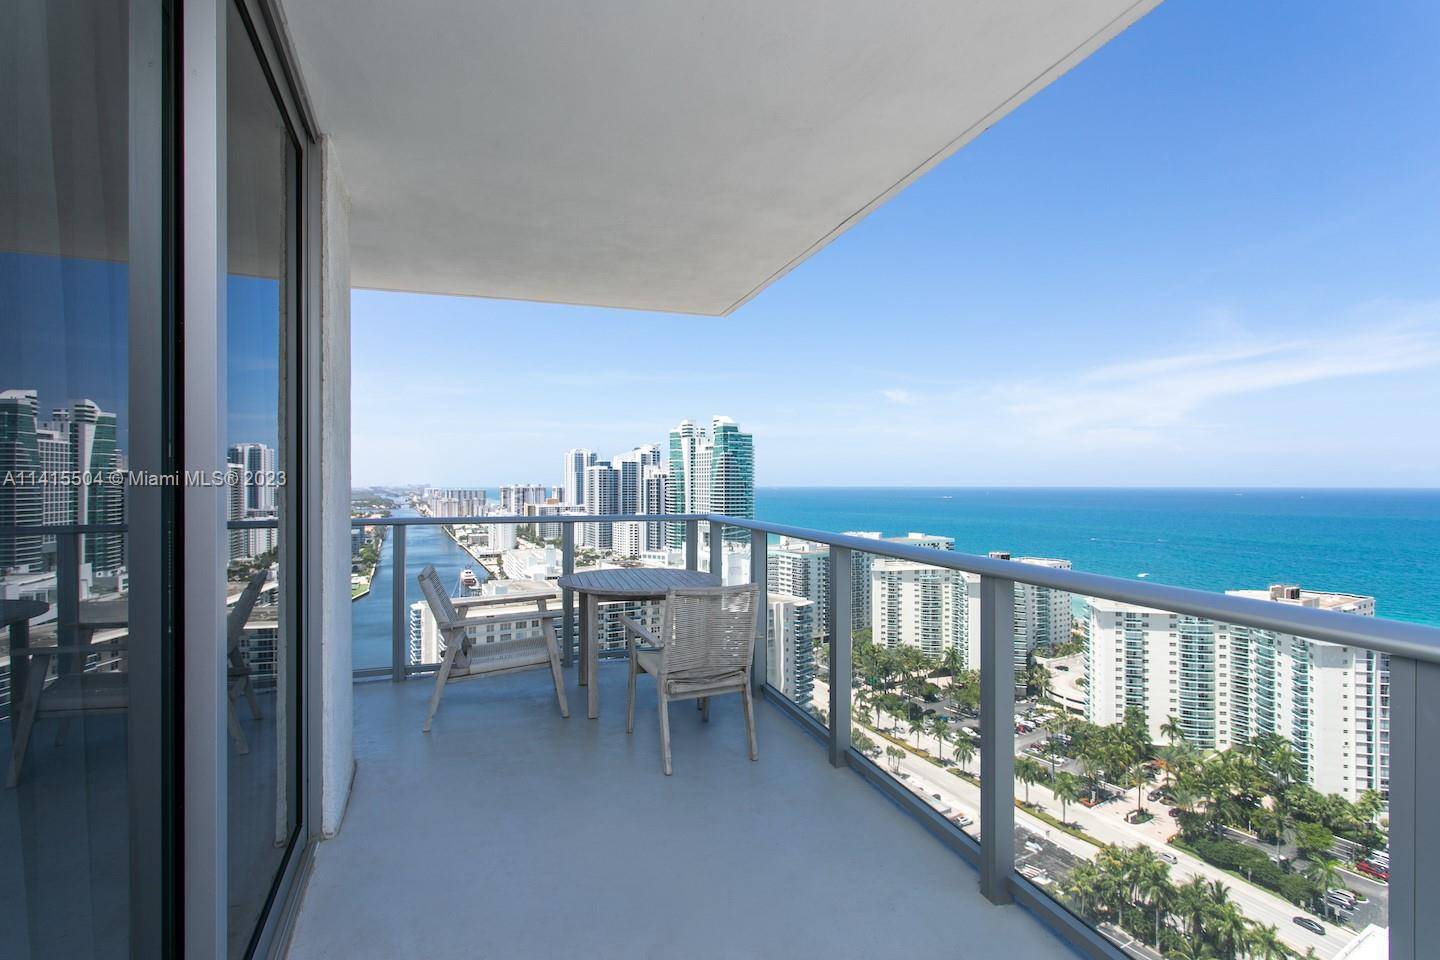 HYDE HOTEL at S. Ocean Drive, just across from the ocean SHORT TERM RENTAL 11, 000 MONTHLY DEC APR 2024 PARKING INCLUDED CALL AGENT FOR WEEKLY RATES Luxury 2BR 2BA ...